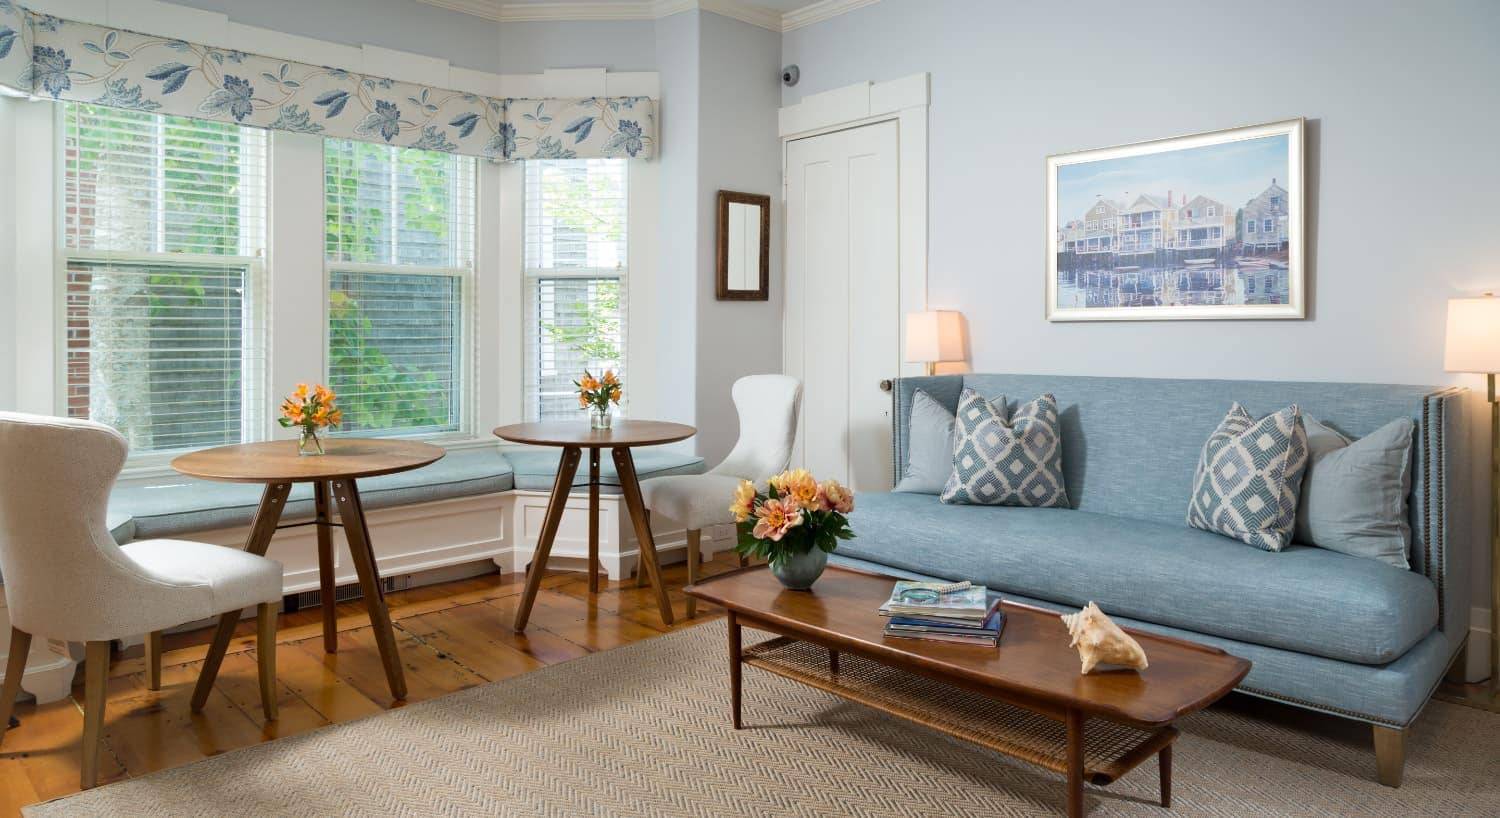 Living room area with hardwood flooring, light colored walls, white trim, blue upholstered couch, and wooden furniture